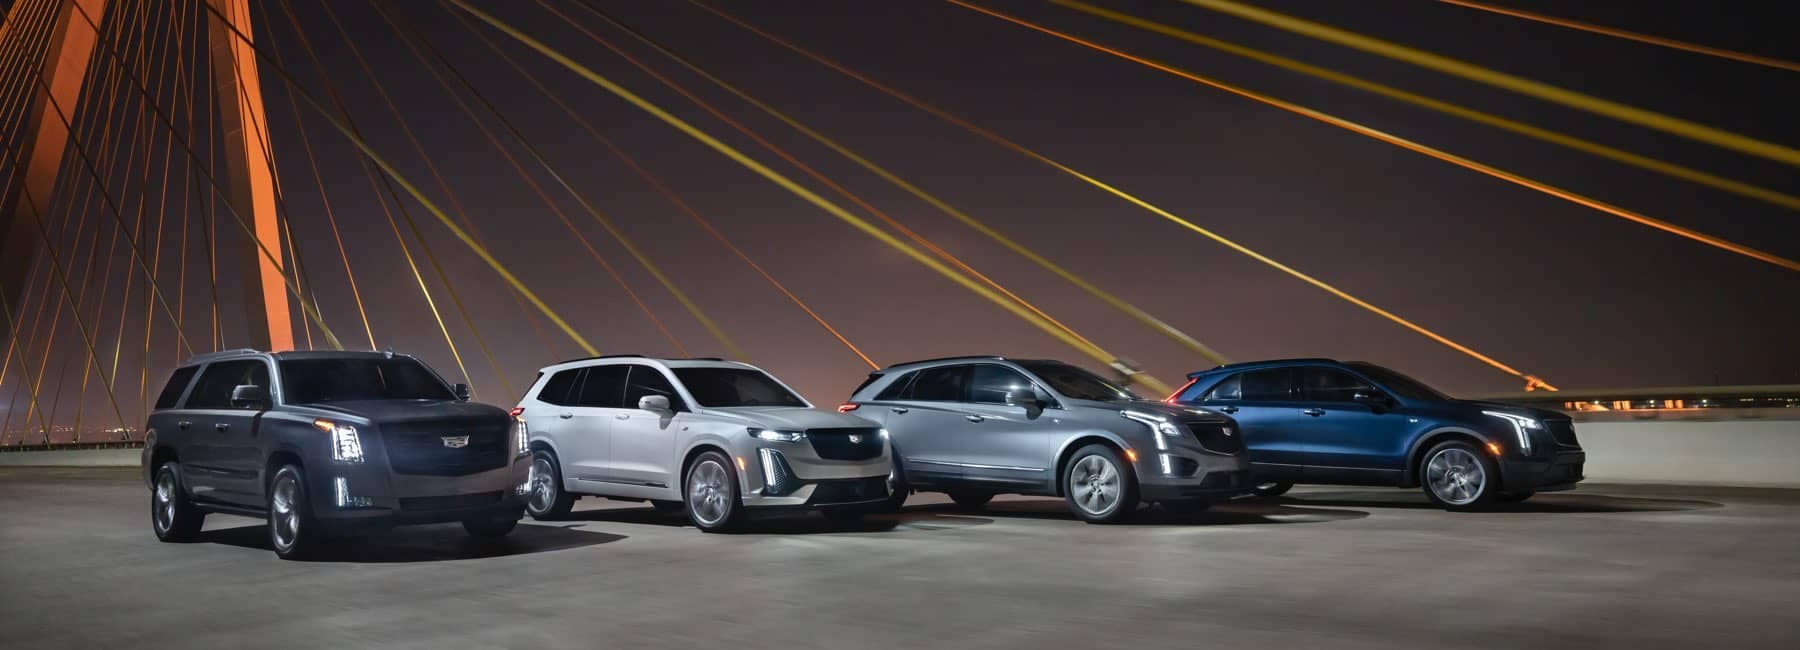 2020 Cadillac line-up in front of bridge